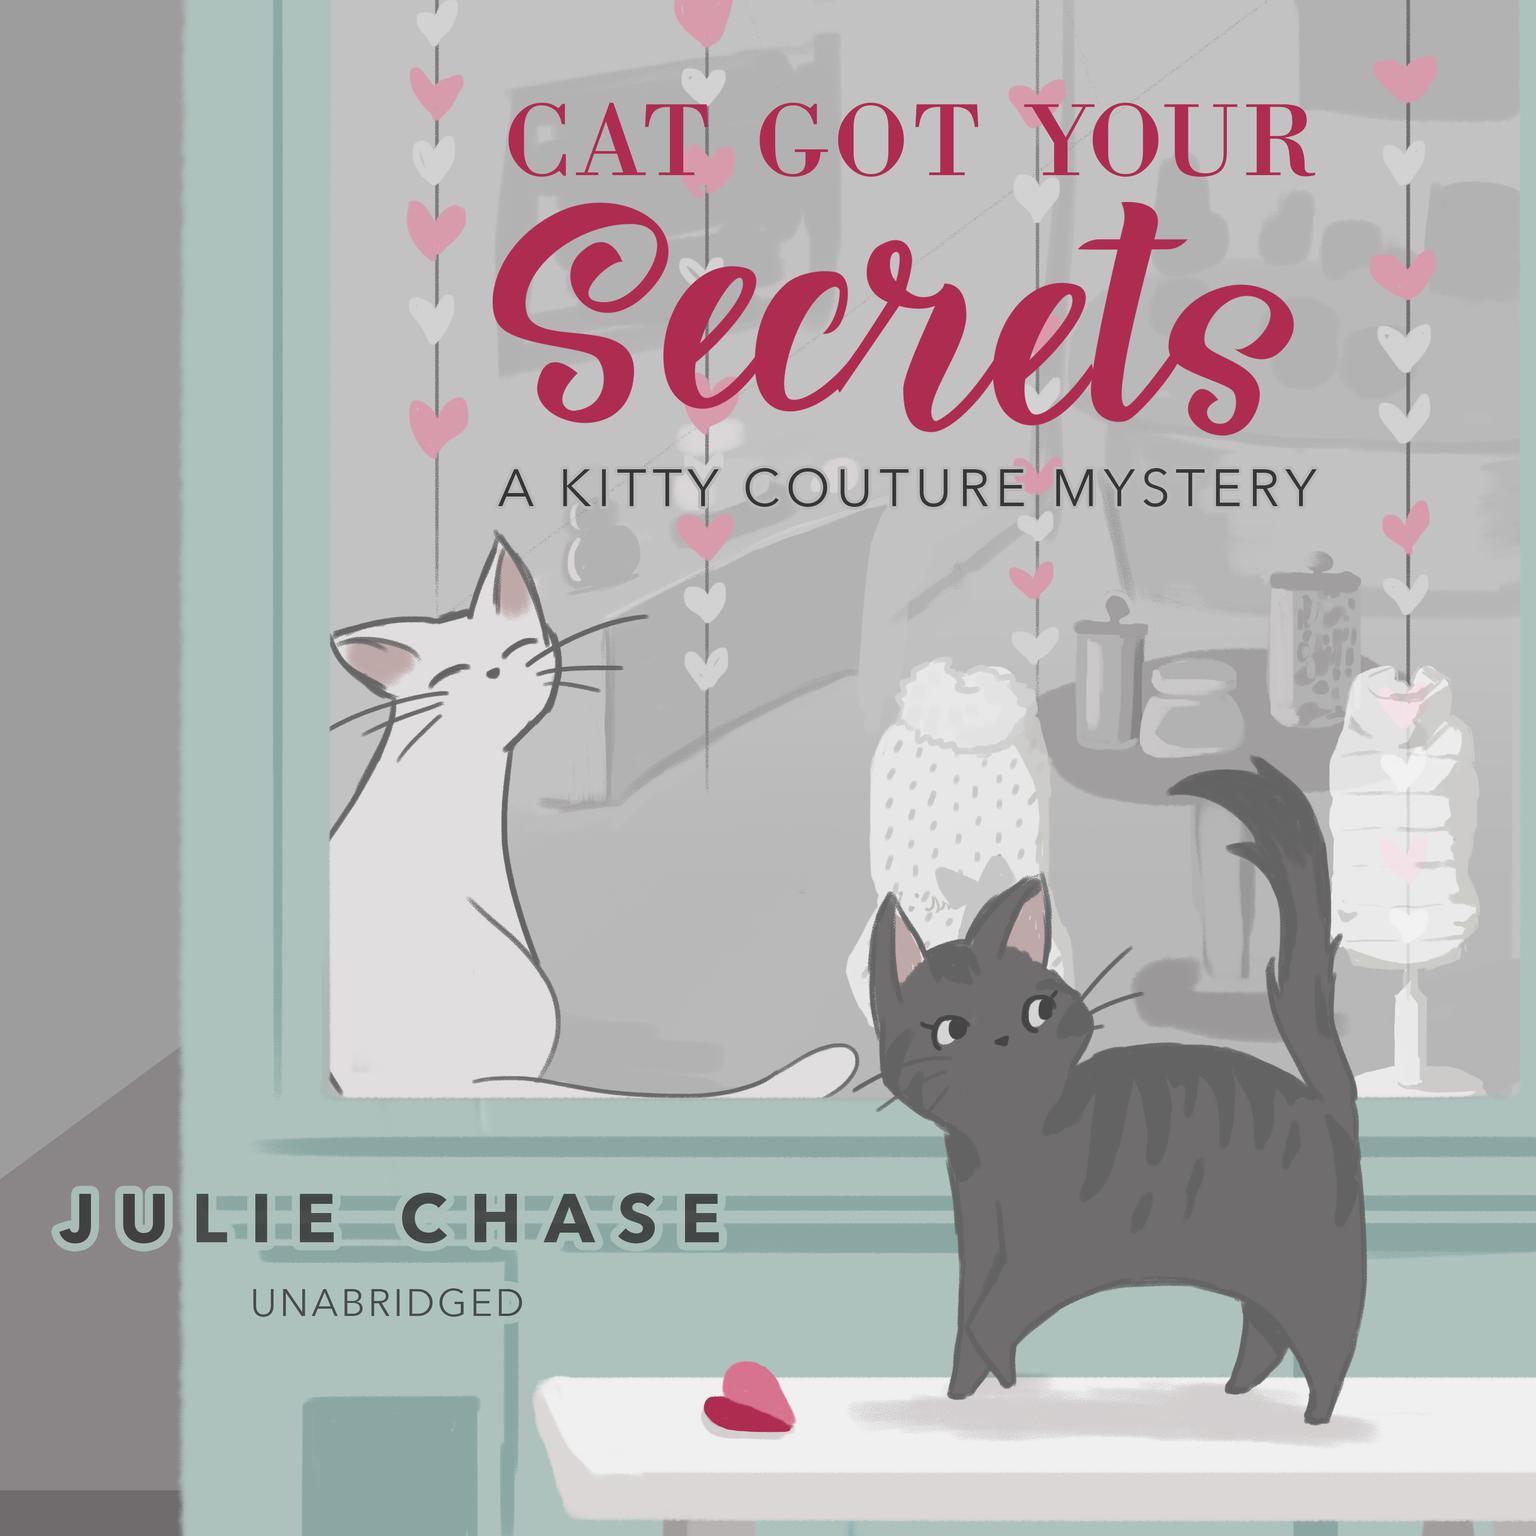 Cat Got Your Secrets: A Kitty Couture Mystery Audiobook, by Julie Chase